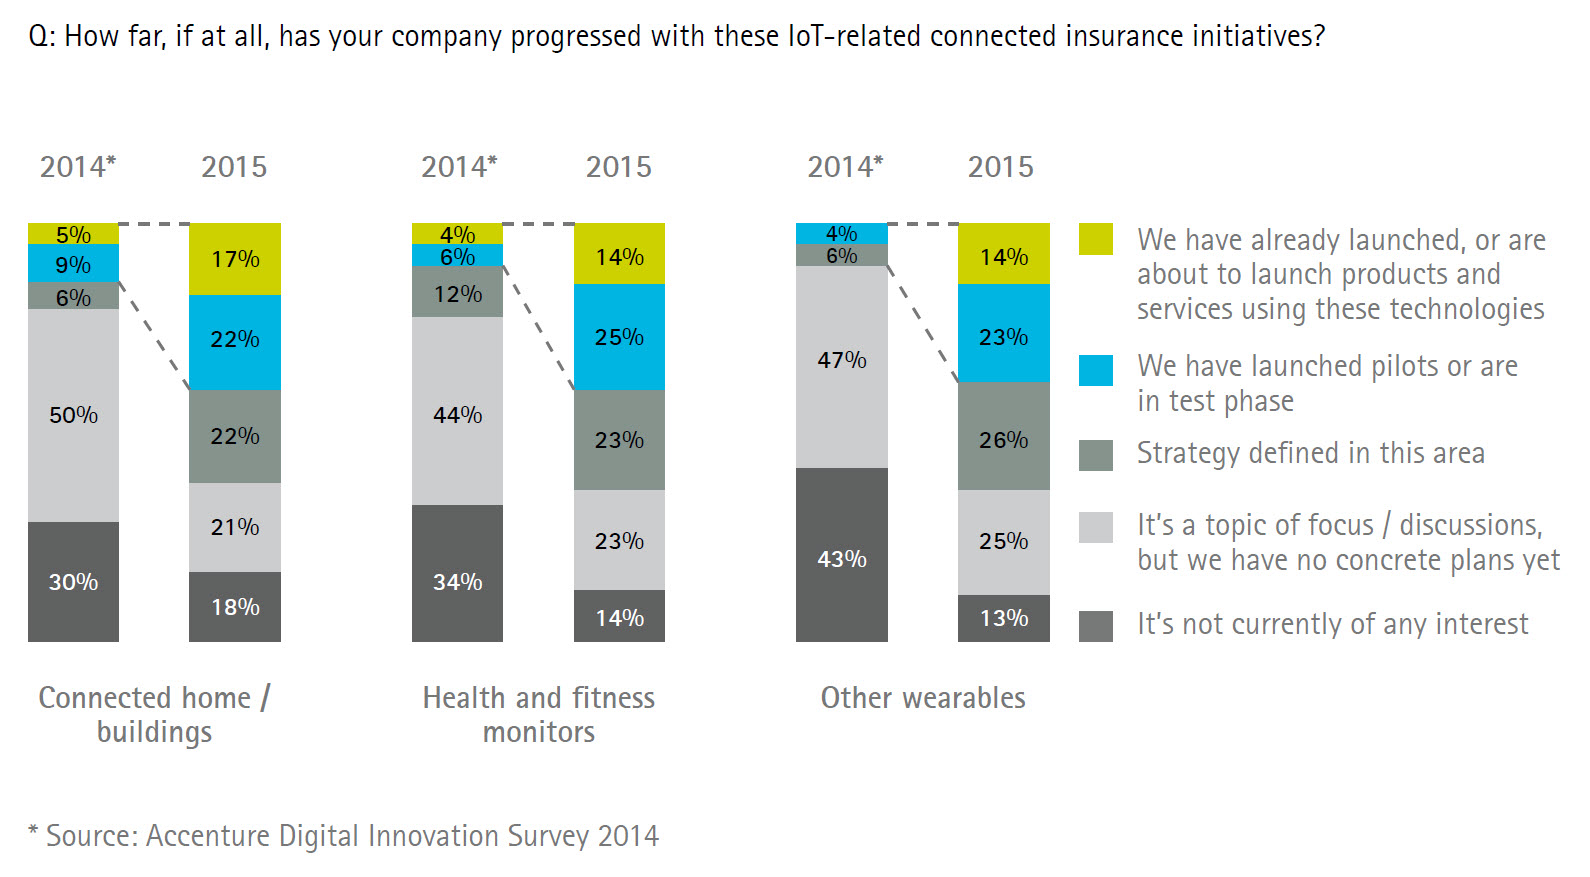 Internet of Things - Insurer current and future plans - Accenture